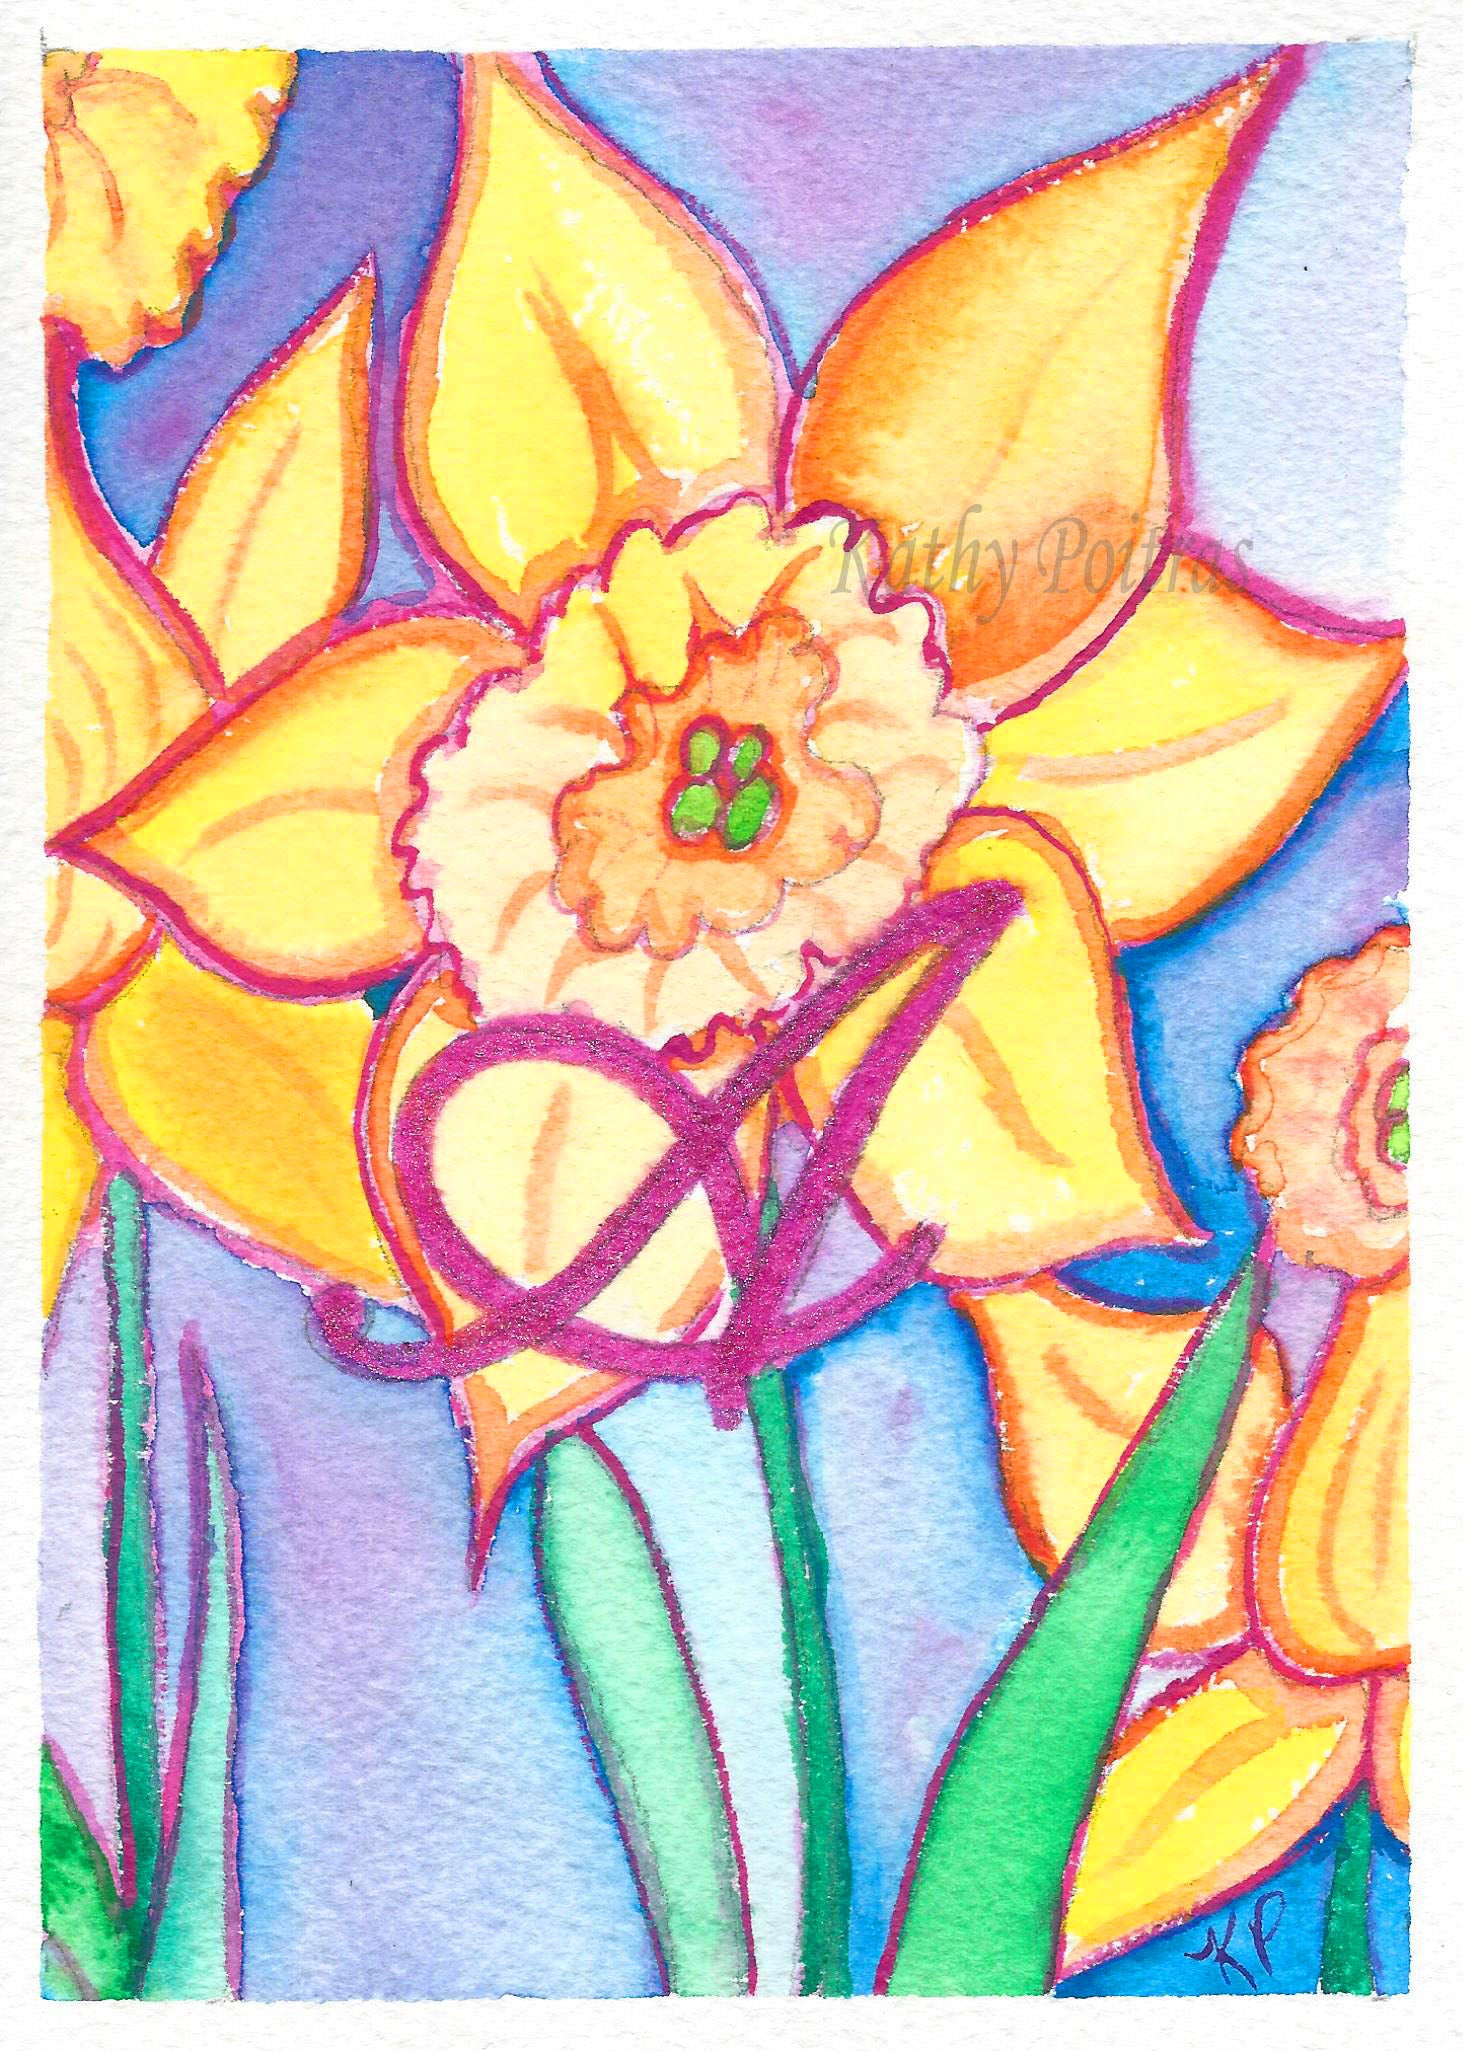 Greeting Card, Birthday Card, Mothers Day Card, Daffodils are the flower of the month for March. This flower of the month card is personalized with a fancy letter A .   by artist Kathy Poitras 